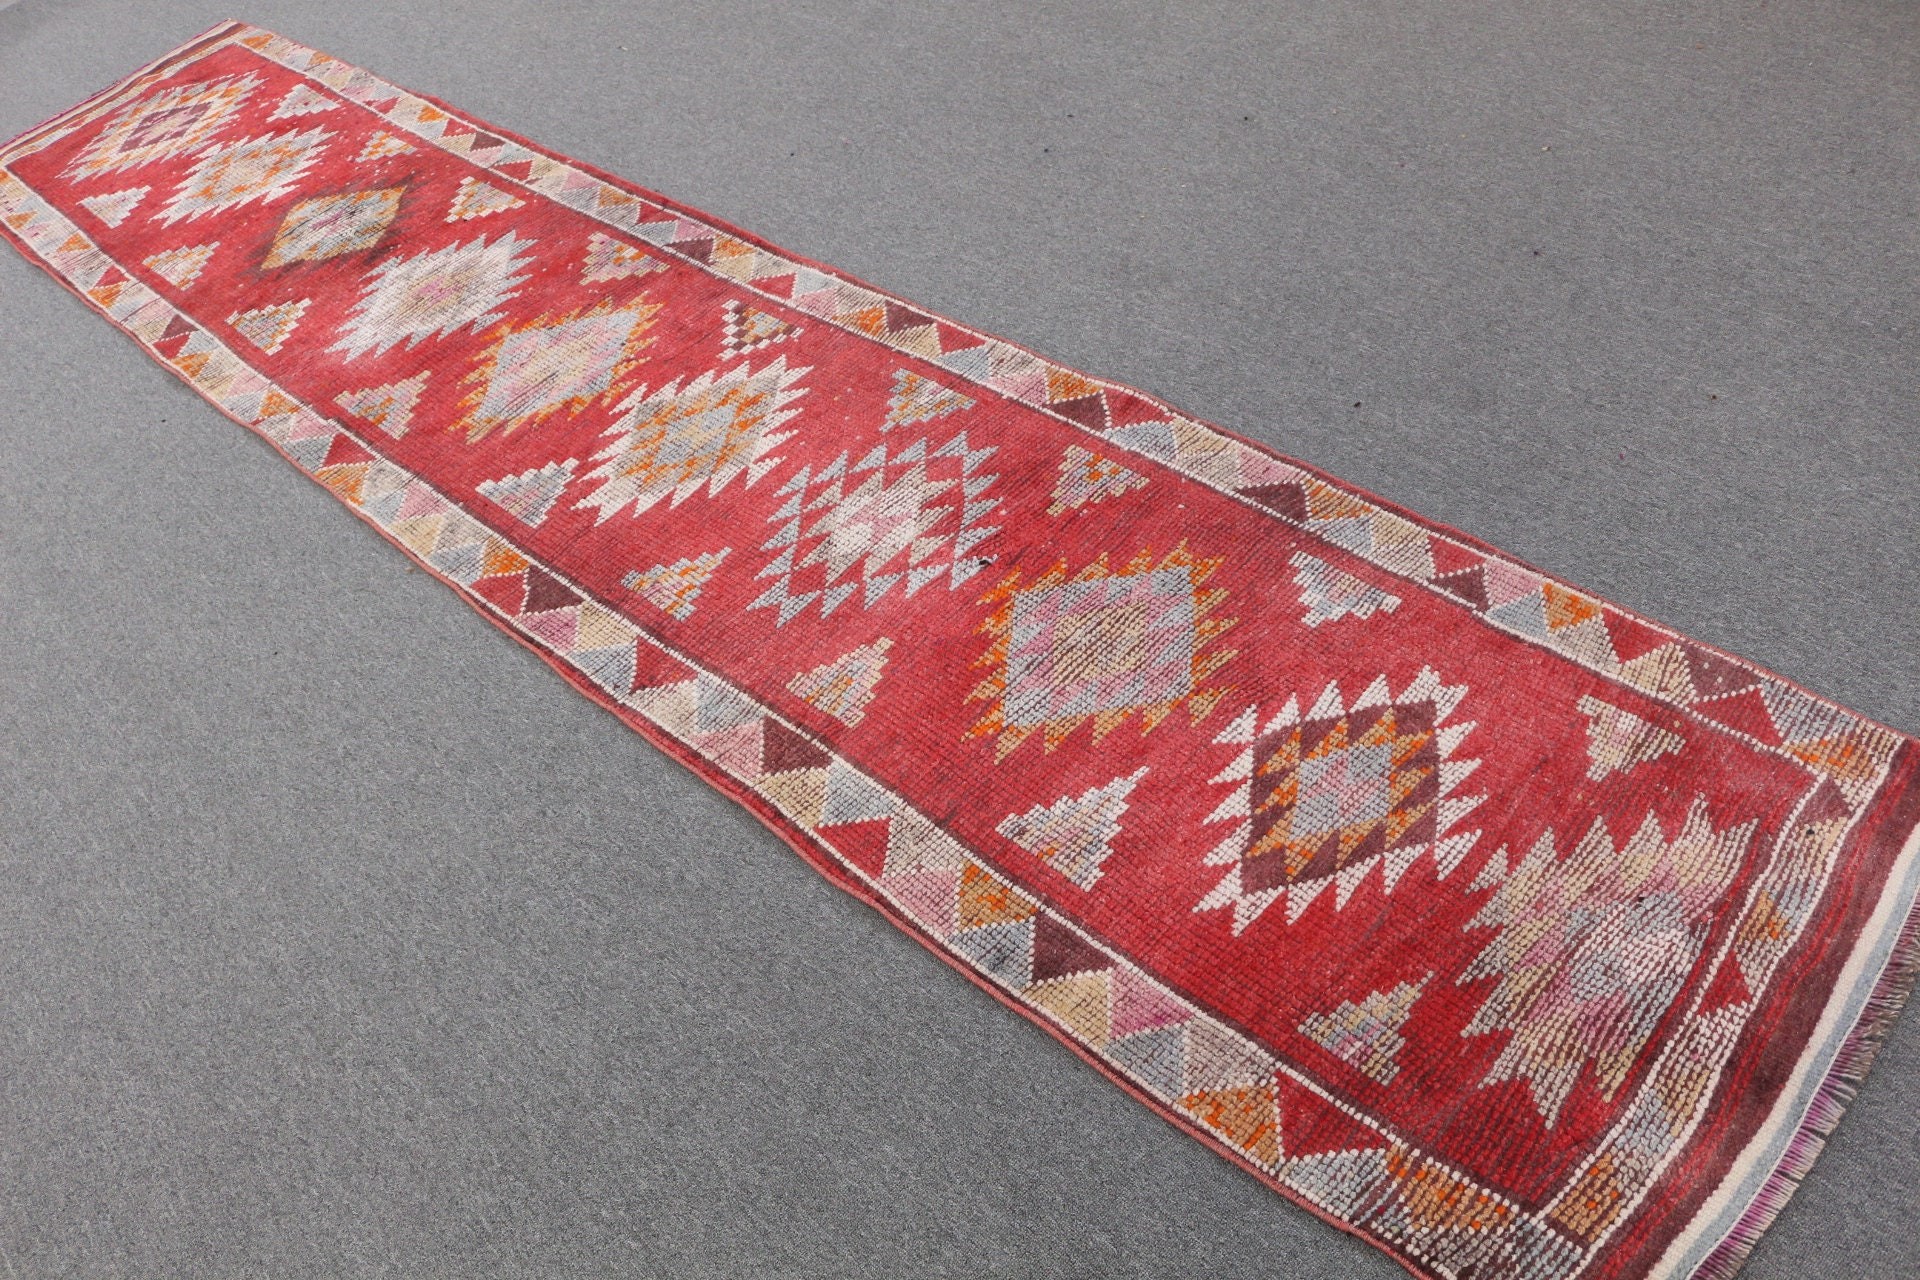 Turkish Rugs, Red  2.5x12.3 ft Runner Rug, Home Decor Rug, Anatolian Rug, Rugs for Hallway, Kitchen Rugs, Vintage Rug